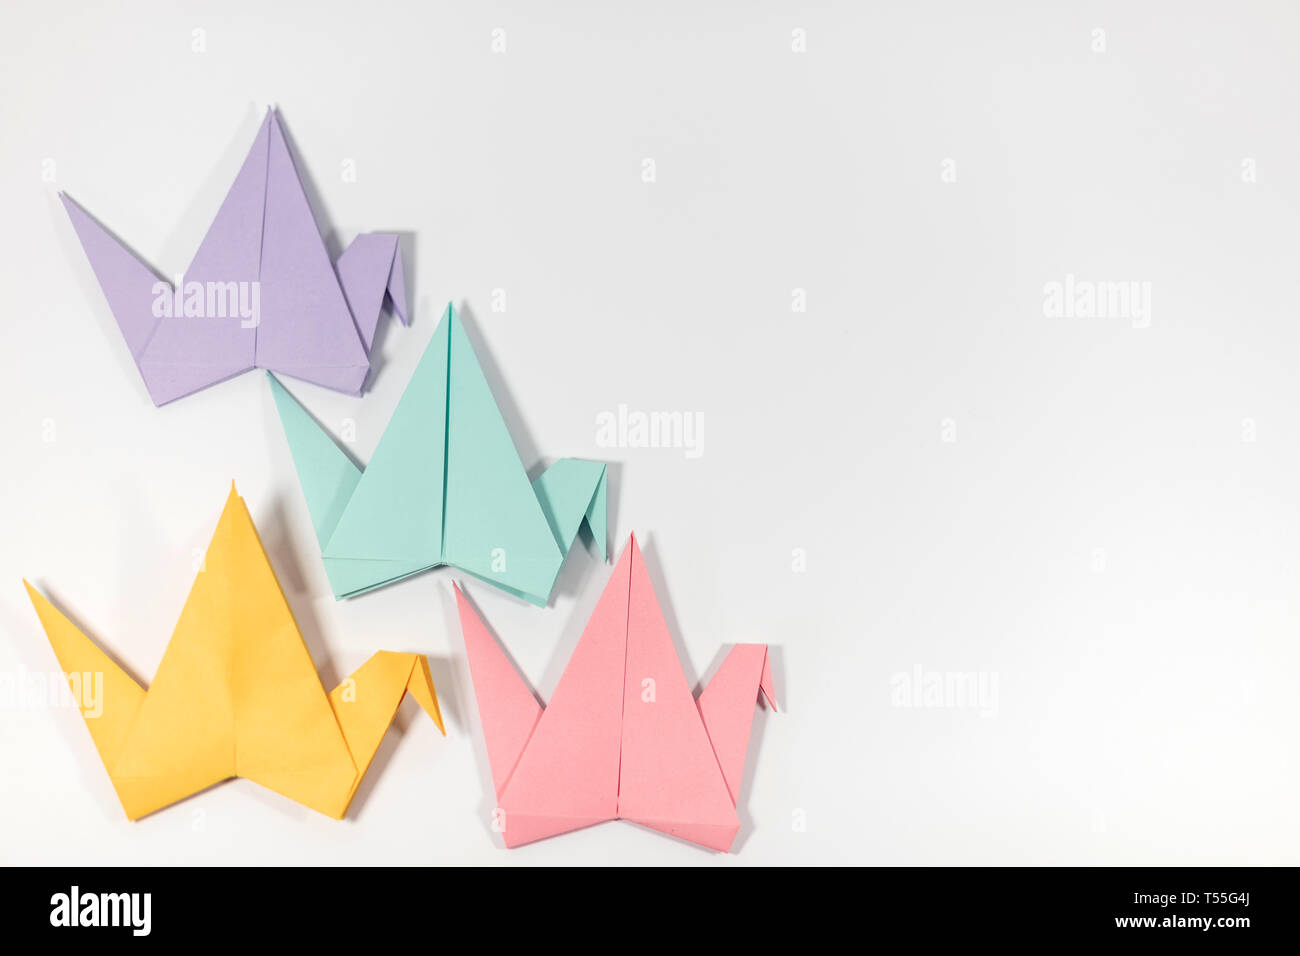 Four hand folded pastel coloured origami paper cranes arranged in a pattern, isolated on a white background Stock Photo